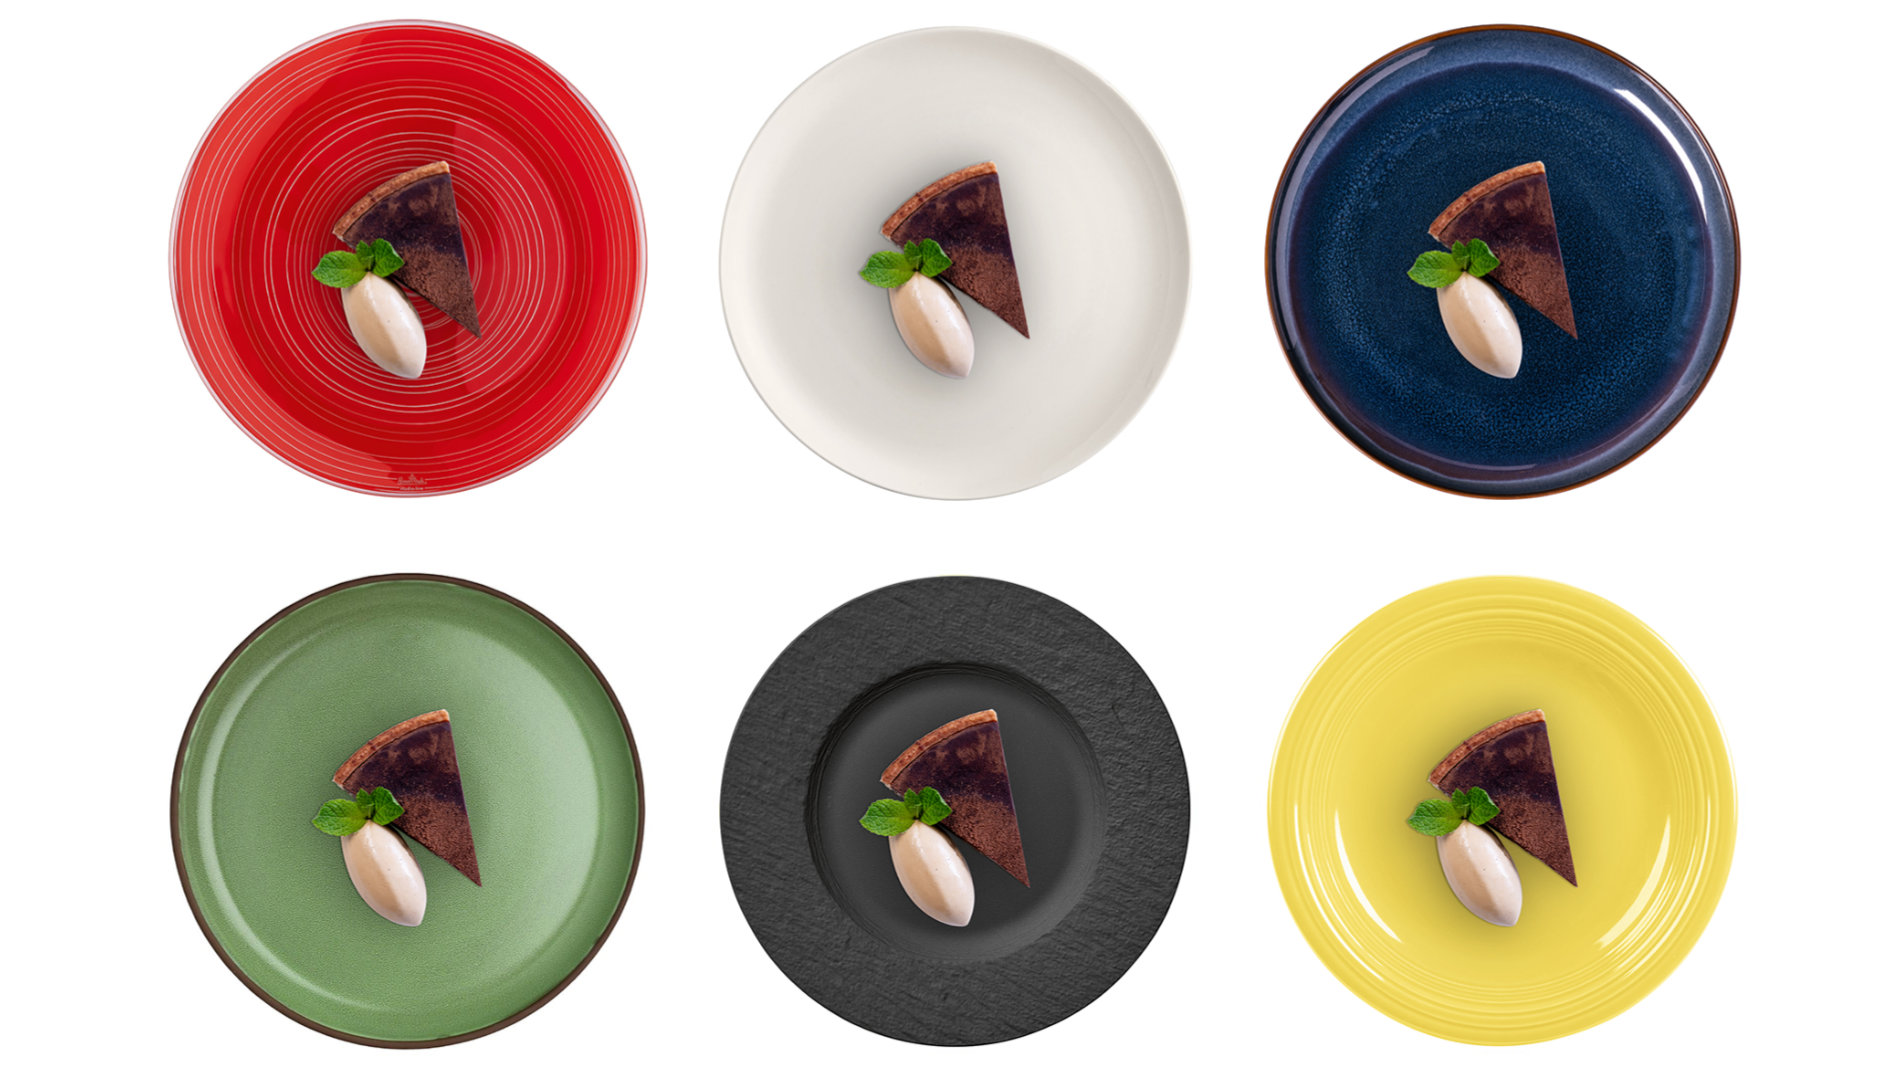 Cake on different coloured plates